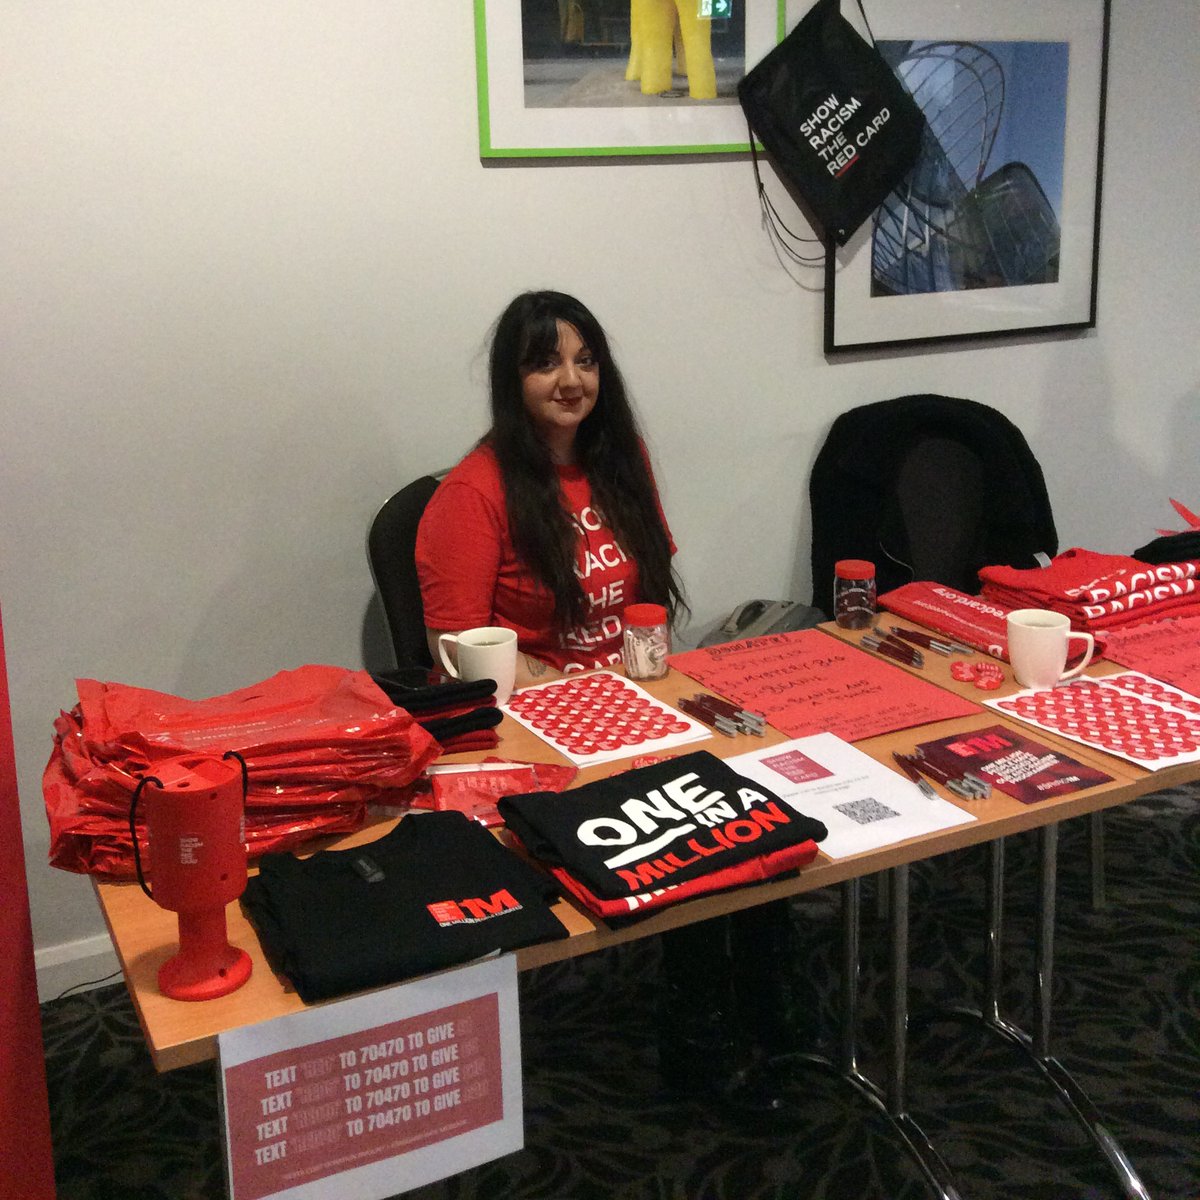 If you’re attending UNISON’s Universities and Colleges Seminar in Liverpool today, please visit the #ShowRacismtheRedCard stand and say hello! @SRTRC_England #UNISONHEFE23